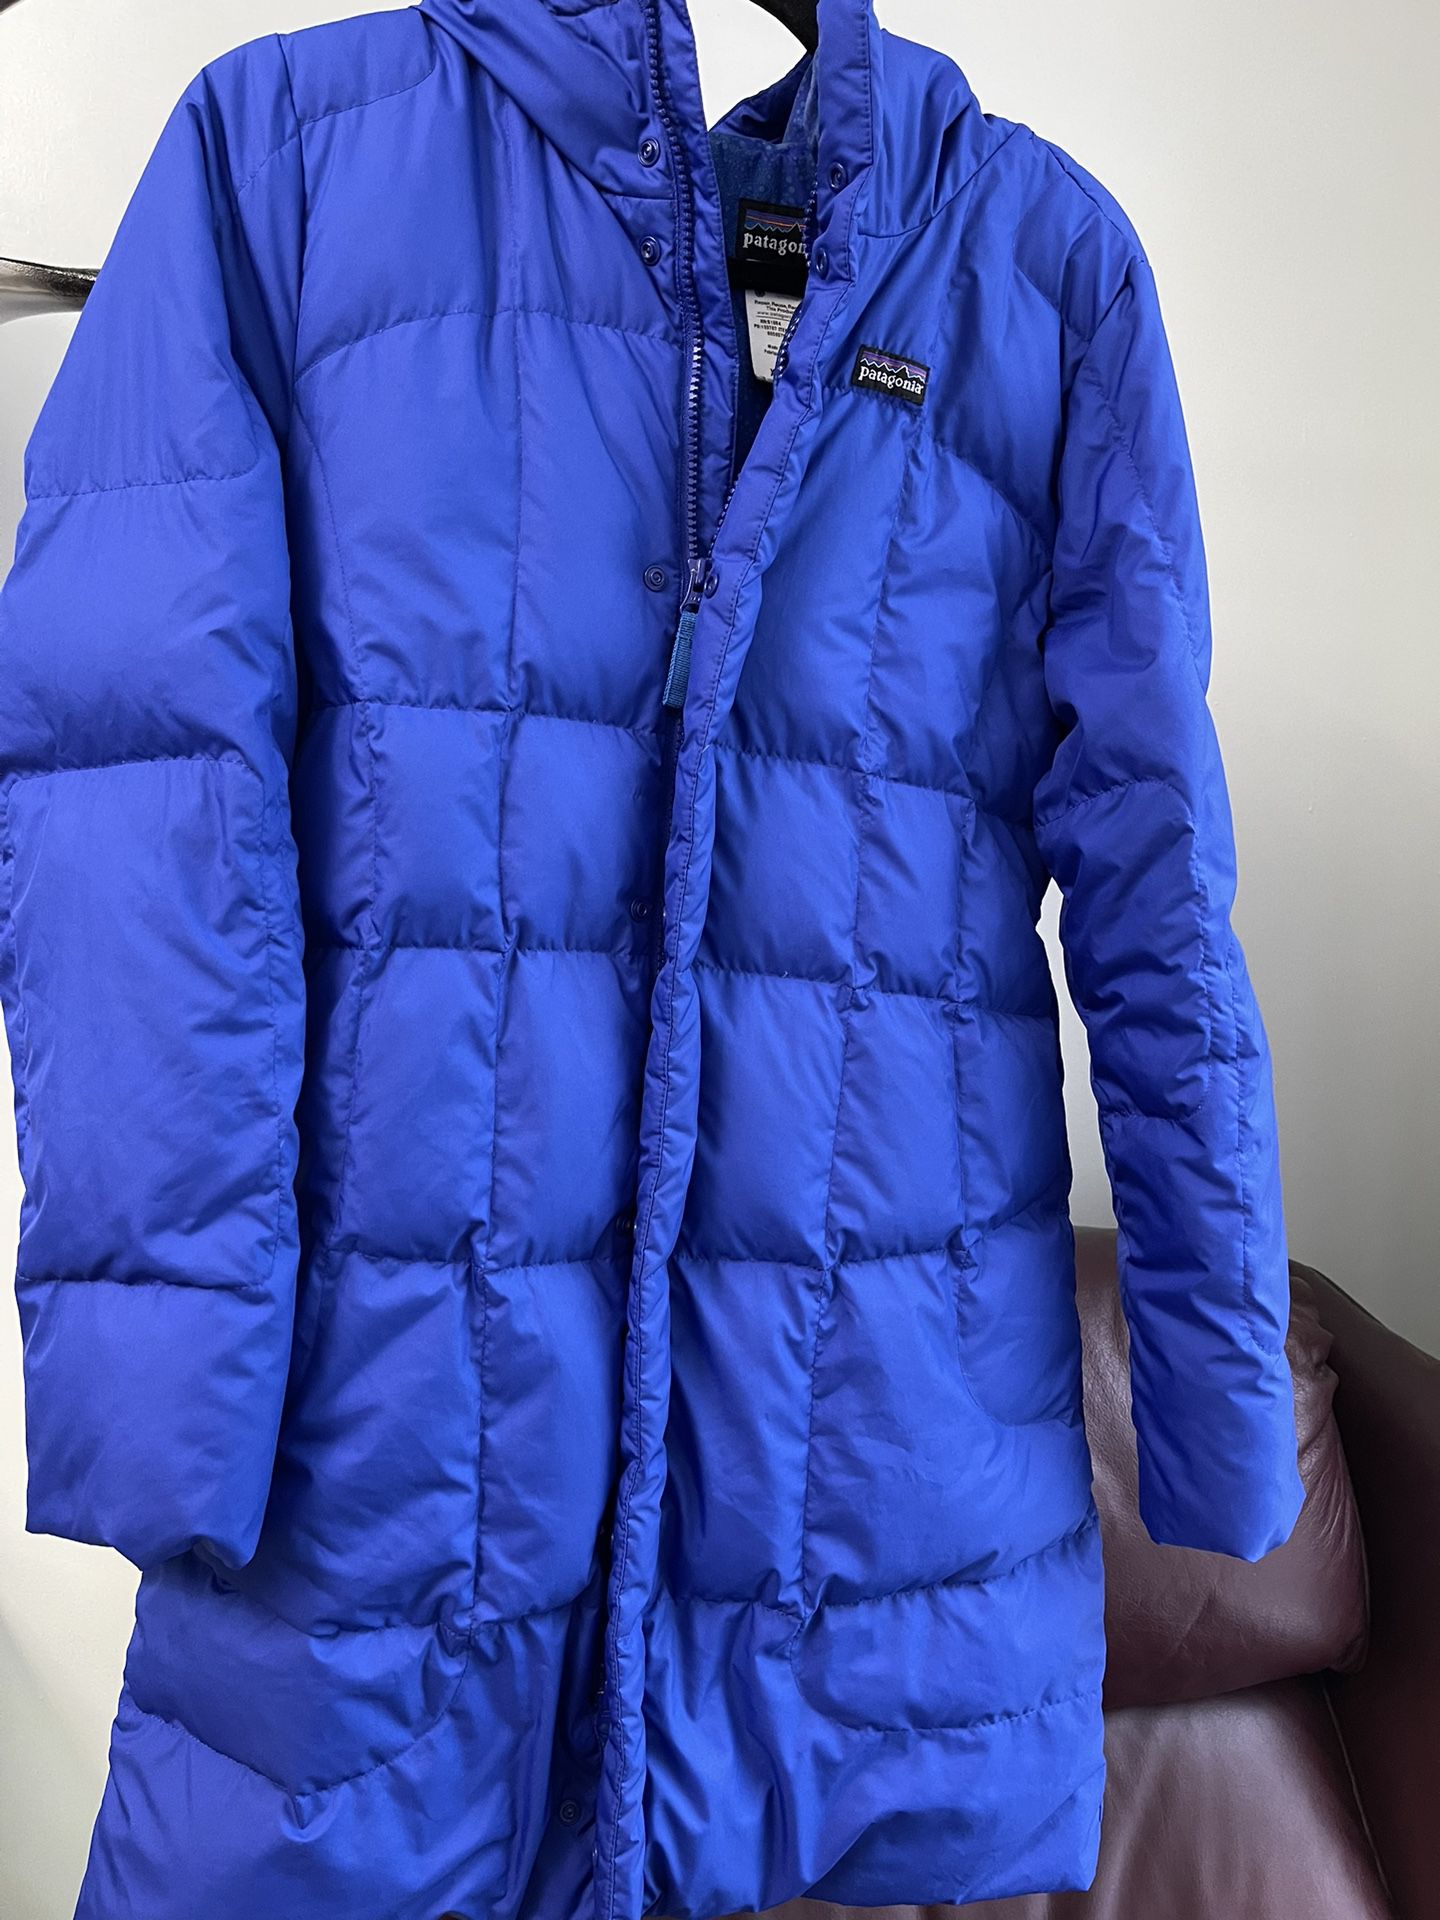 Patagonia quilted down Girl's puffer hooded knee length blue jacket, Size XL